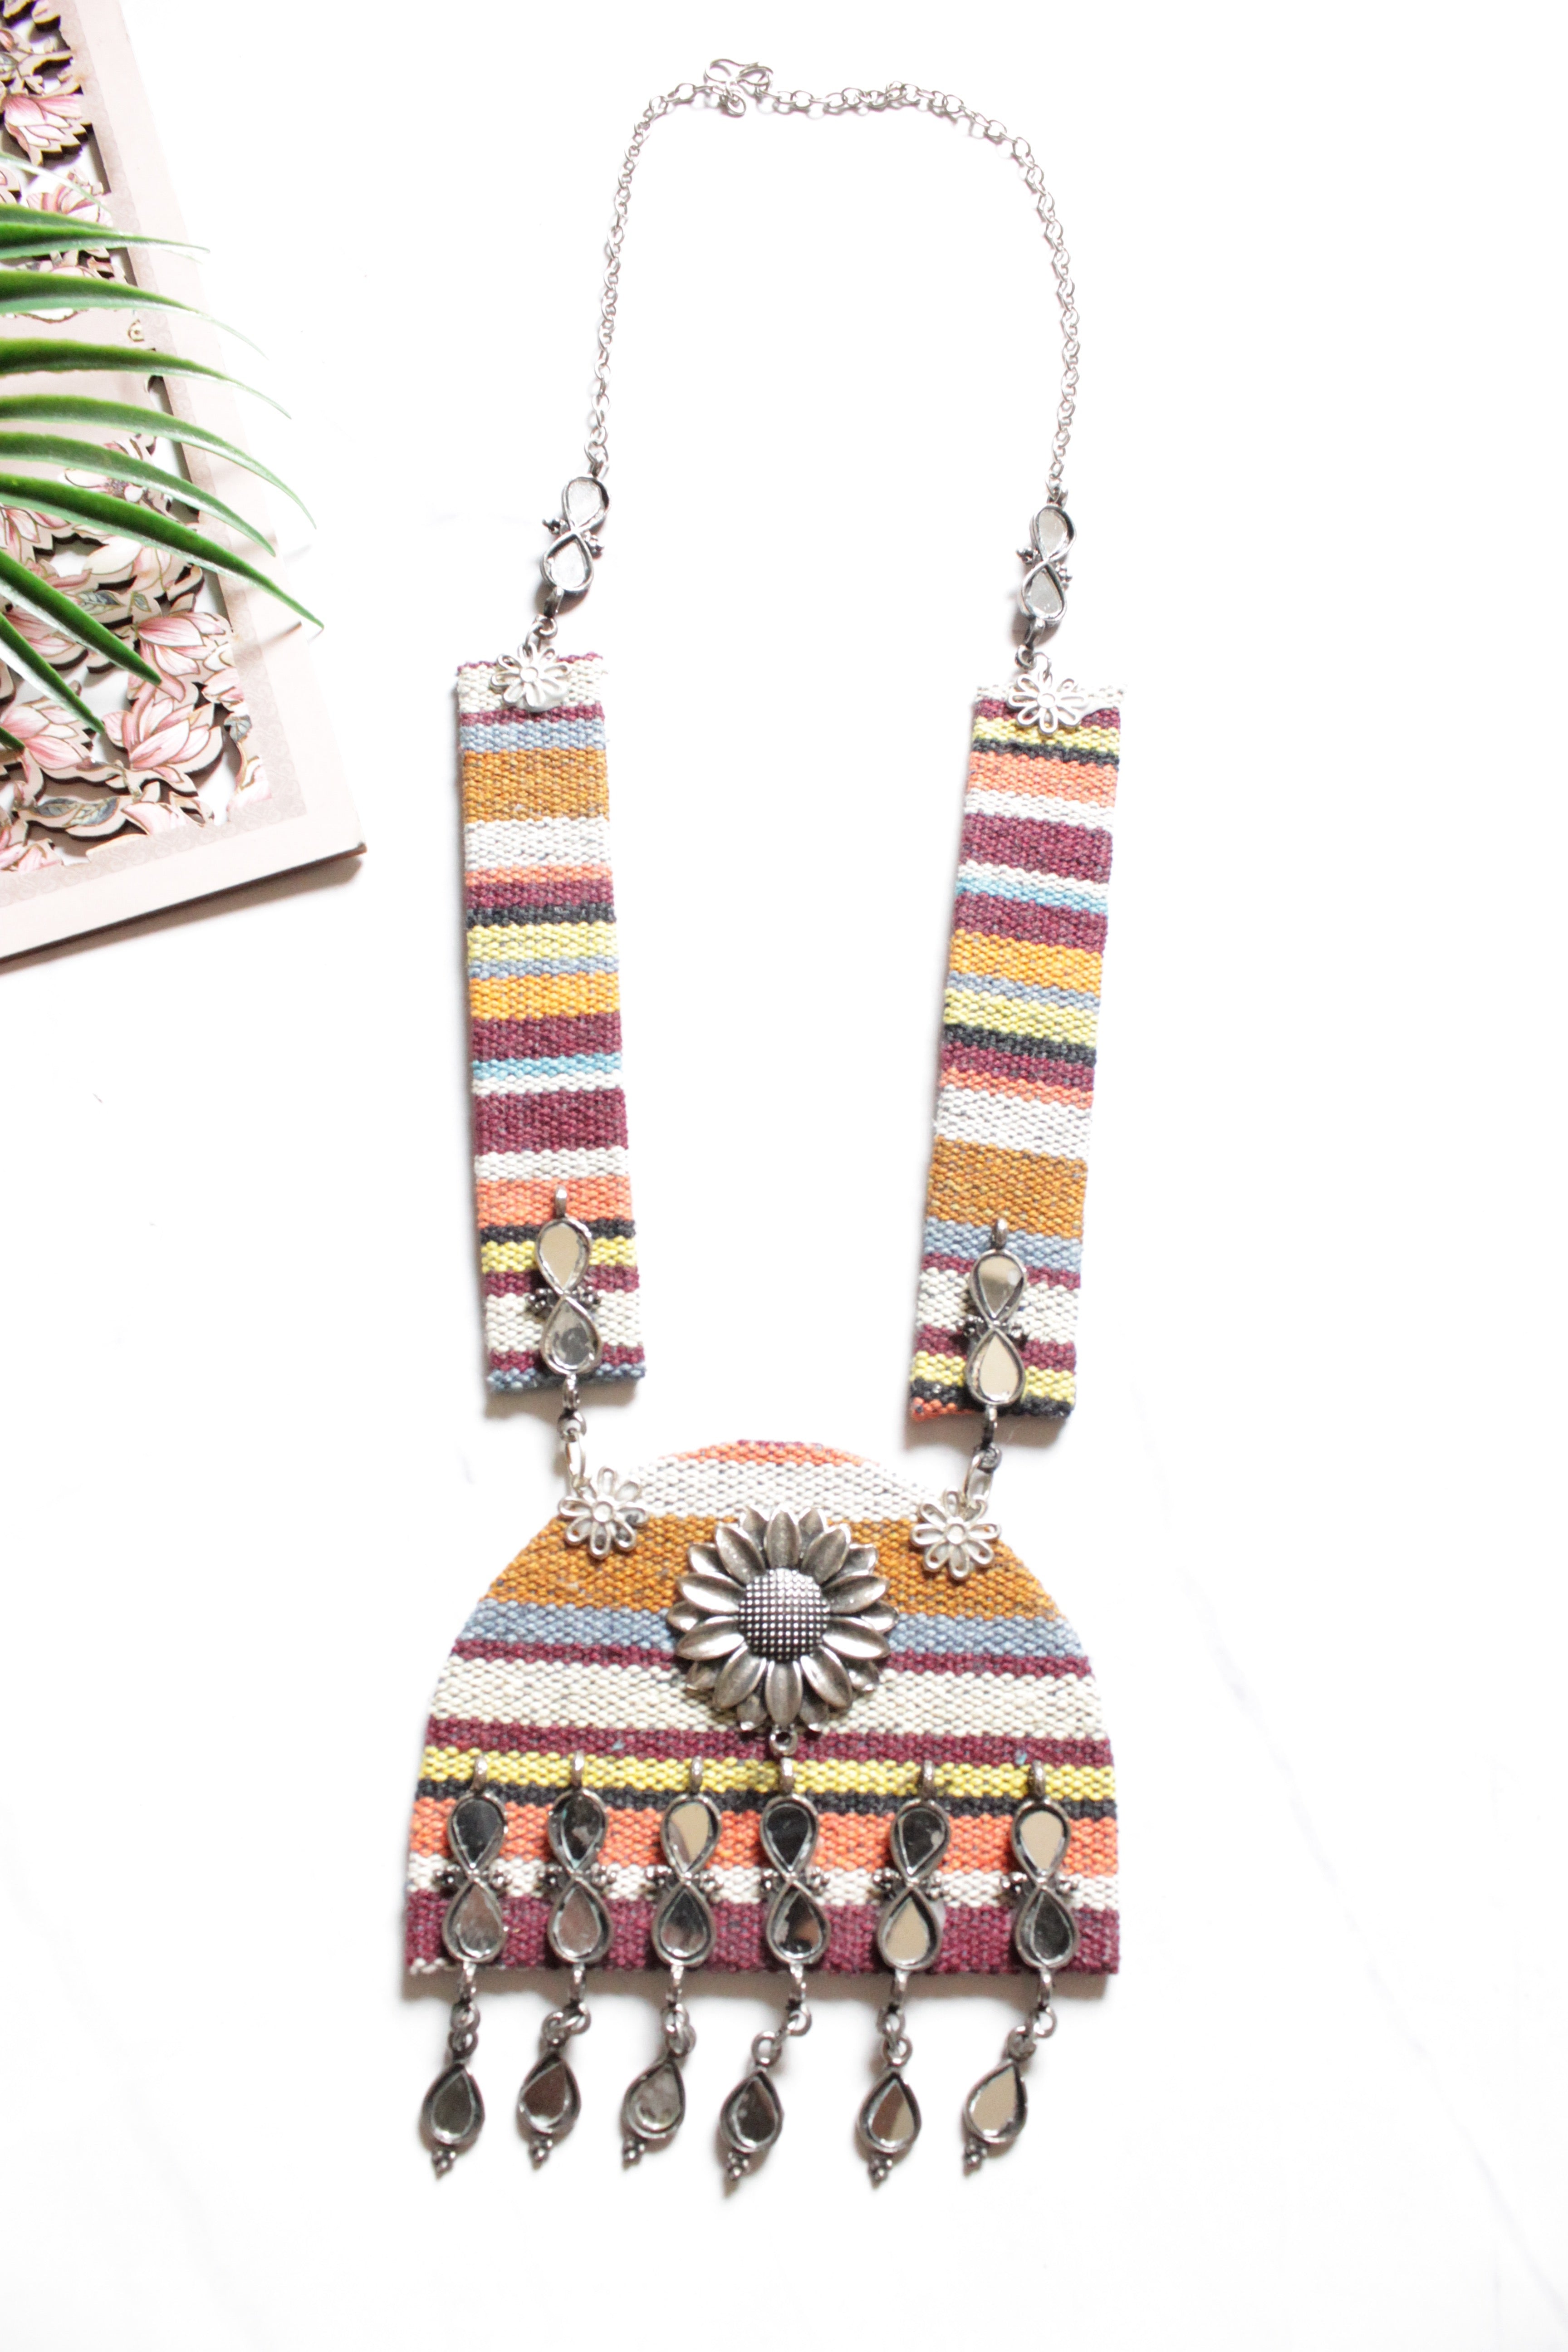 Jute Tribal Fabric Long Necklace Embellished with Oxidised Silver Metal Charms and Mirrors